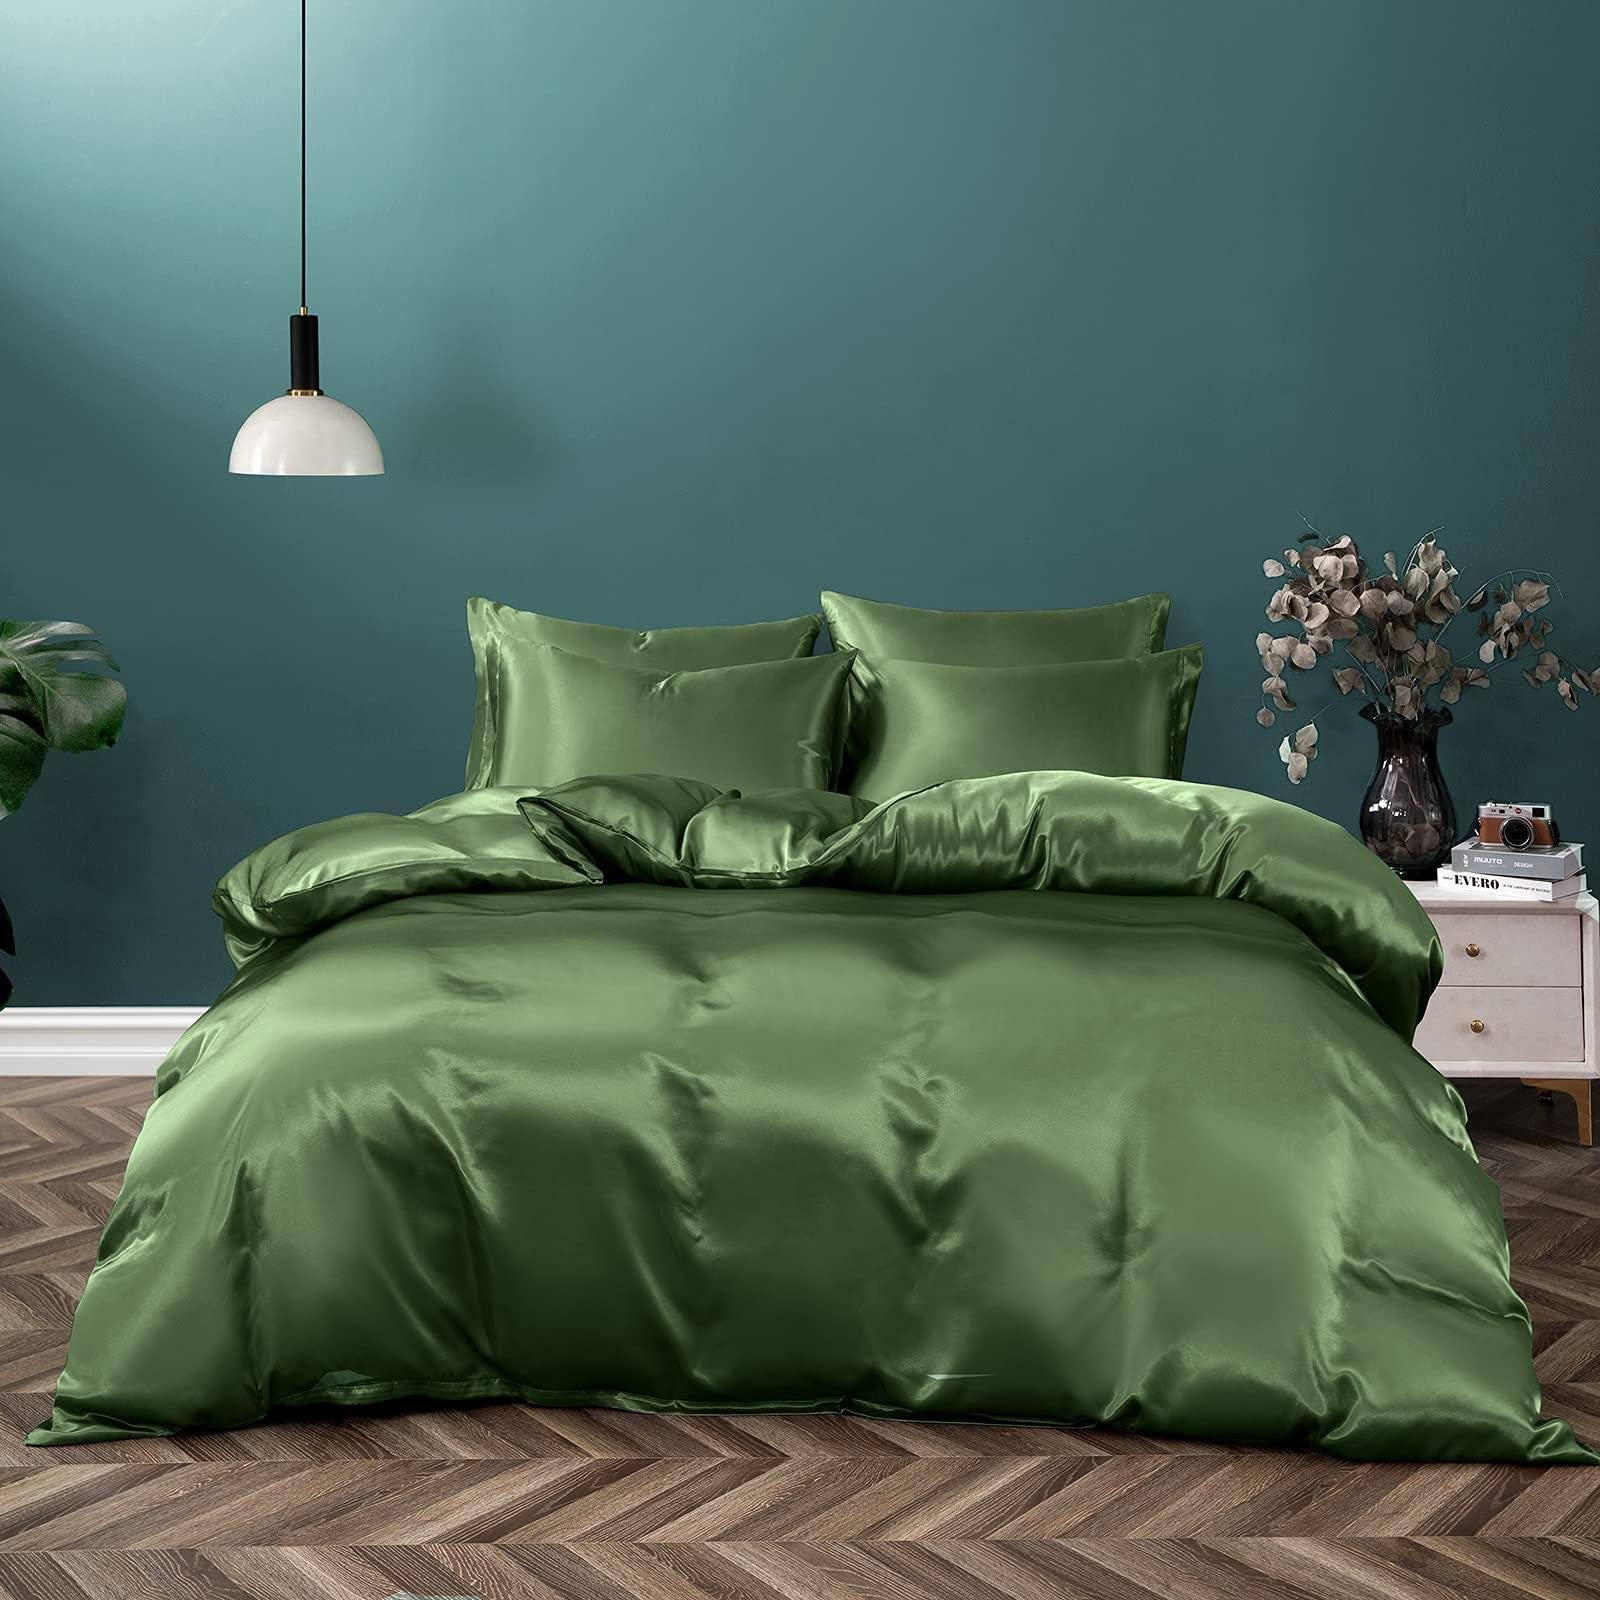 Luxurious Sage Green Silk Duvet Cover Set for High-Quality, Breathable Bedding | Image